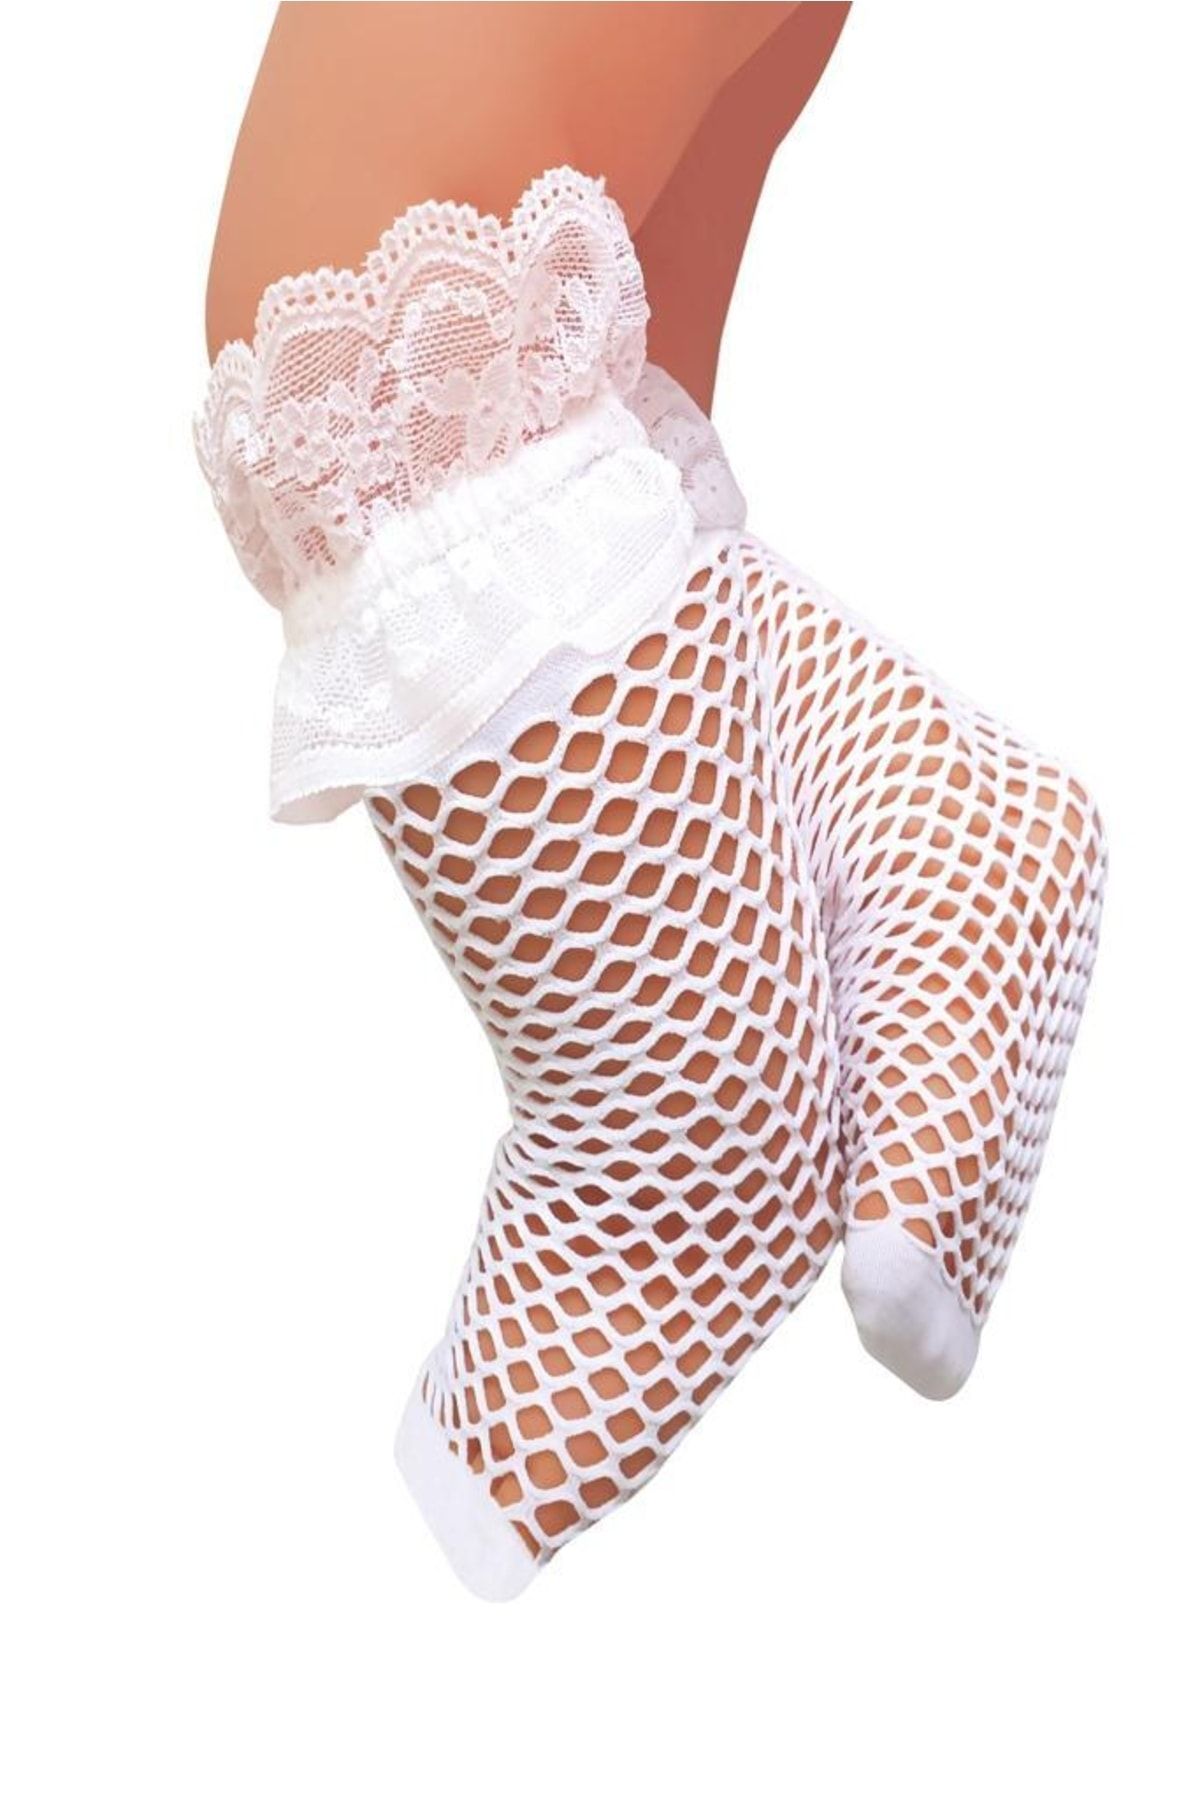 Daymod Baby White Pesca Lace Knee-high Socks with Accessories